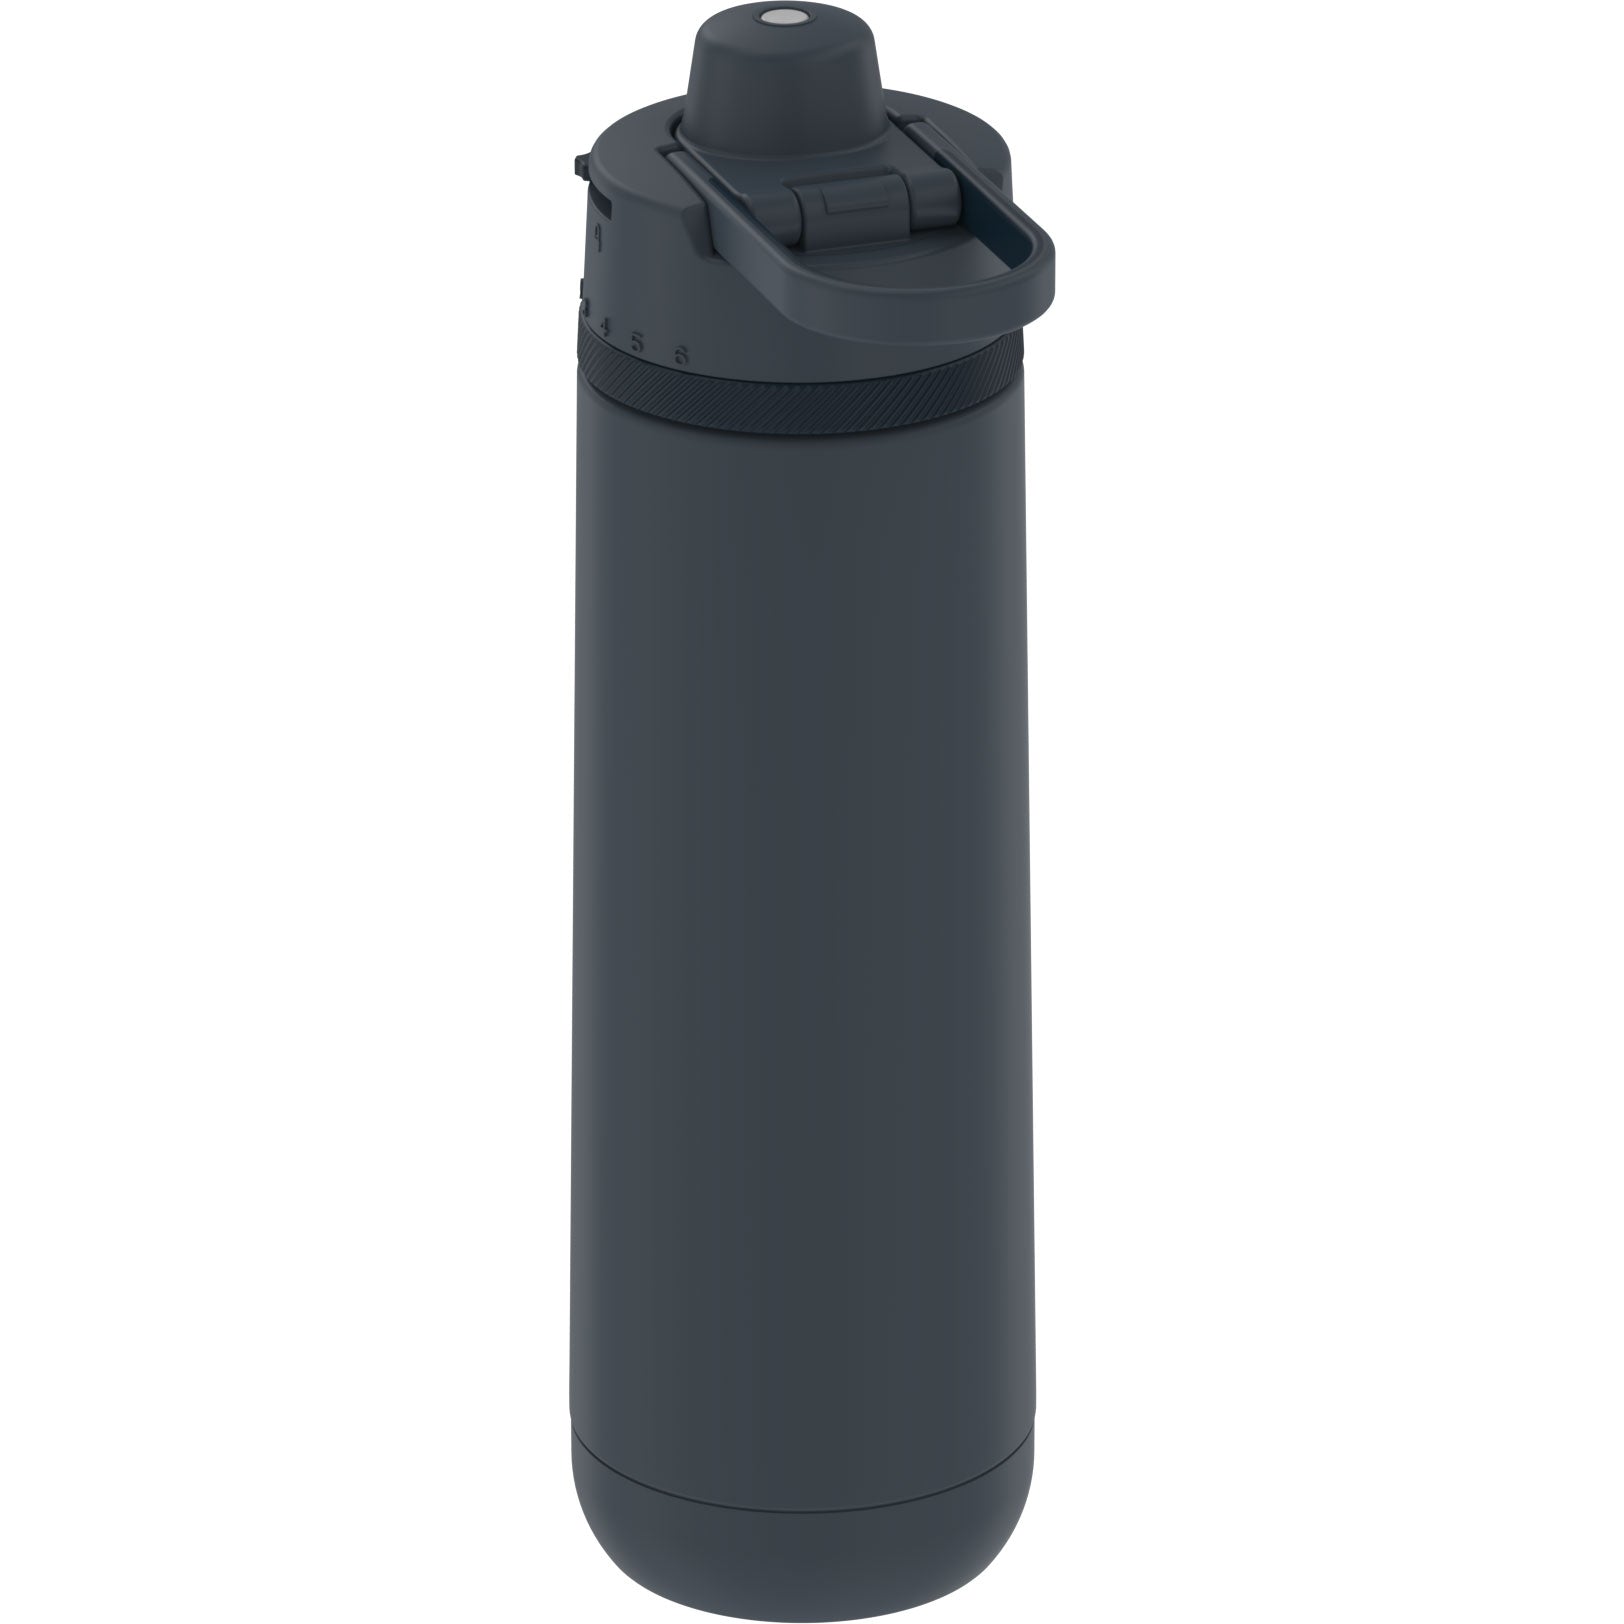 The 24oz Vacuum Insulated Stainless Steel Water Bottle - All in Motion™  Black is our store's newly launched 2021 product on Water Bottles Sales